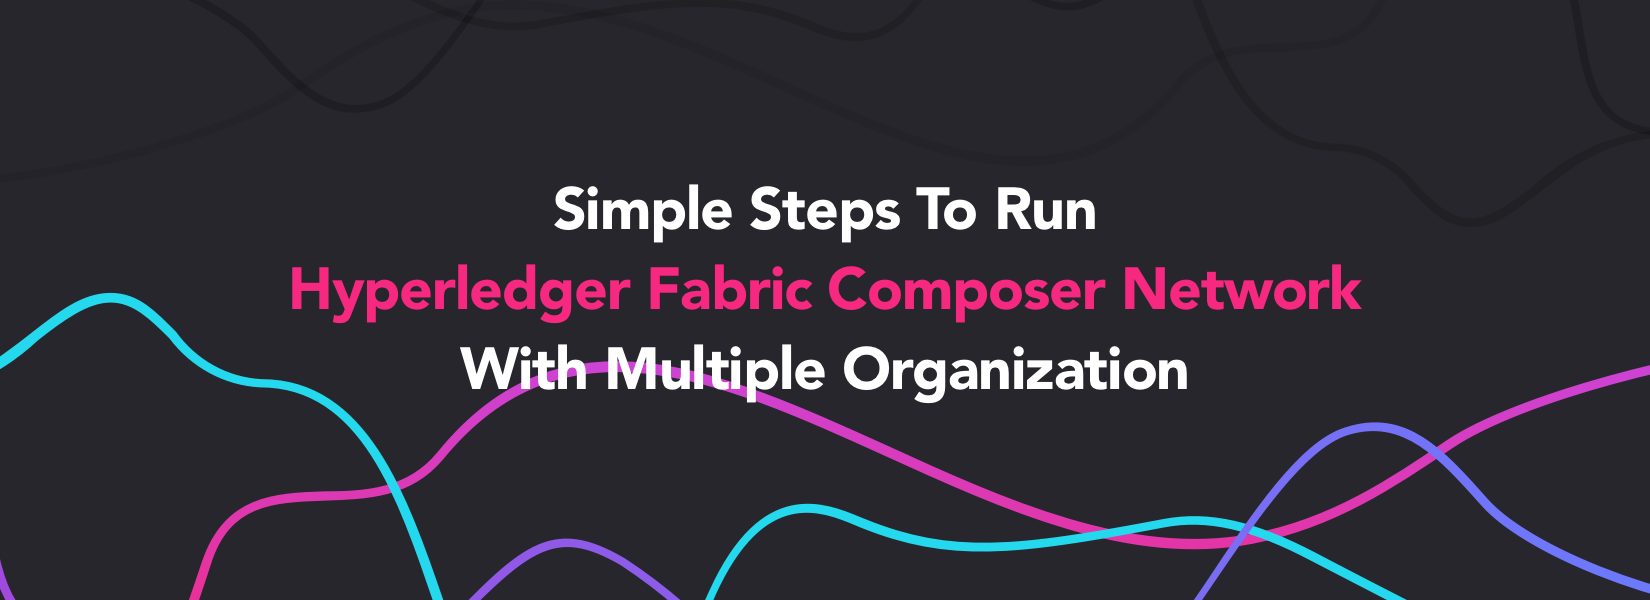 Simple Steps To Run Hyperledger Fabric Composer Network With Multiple Organization